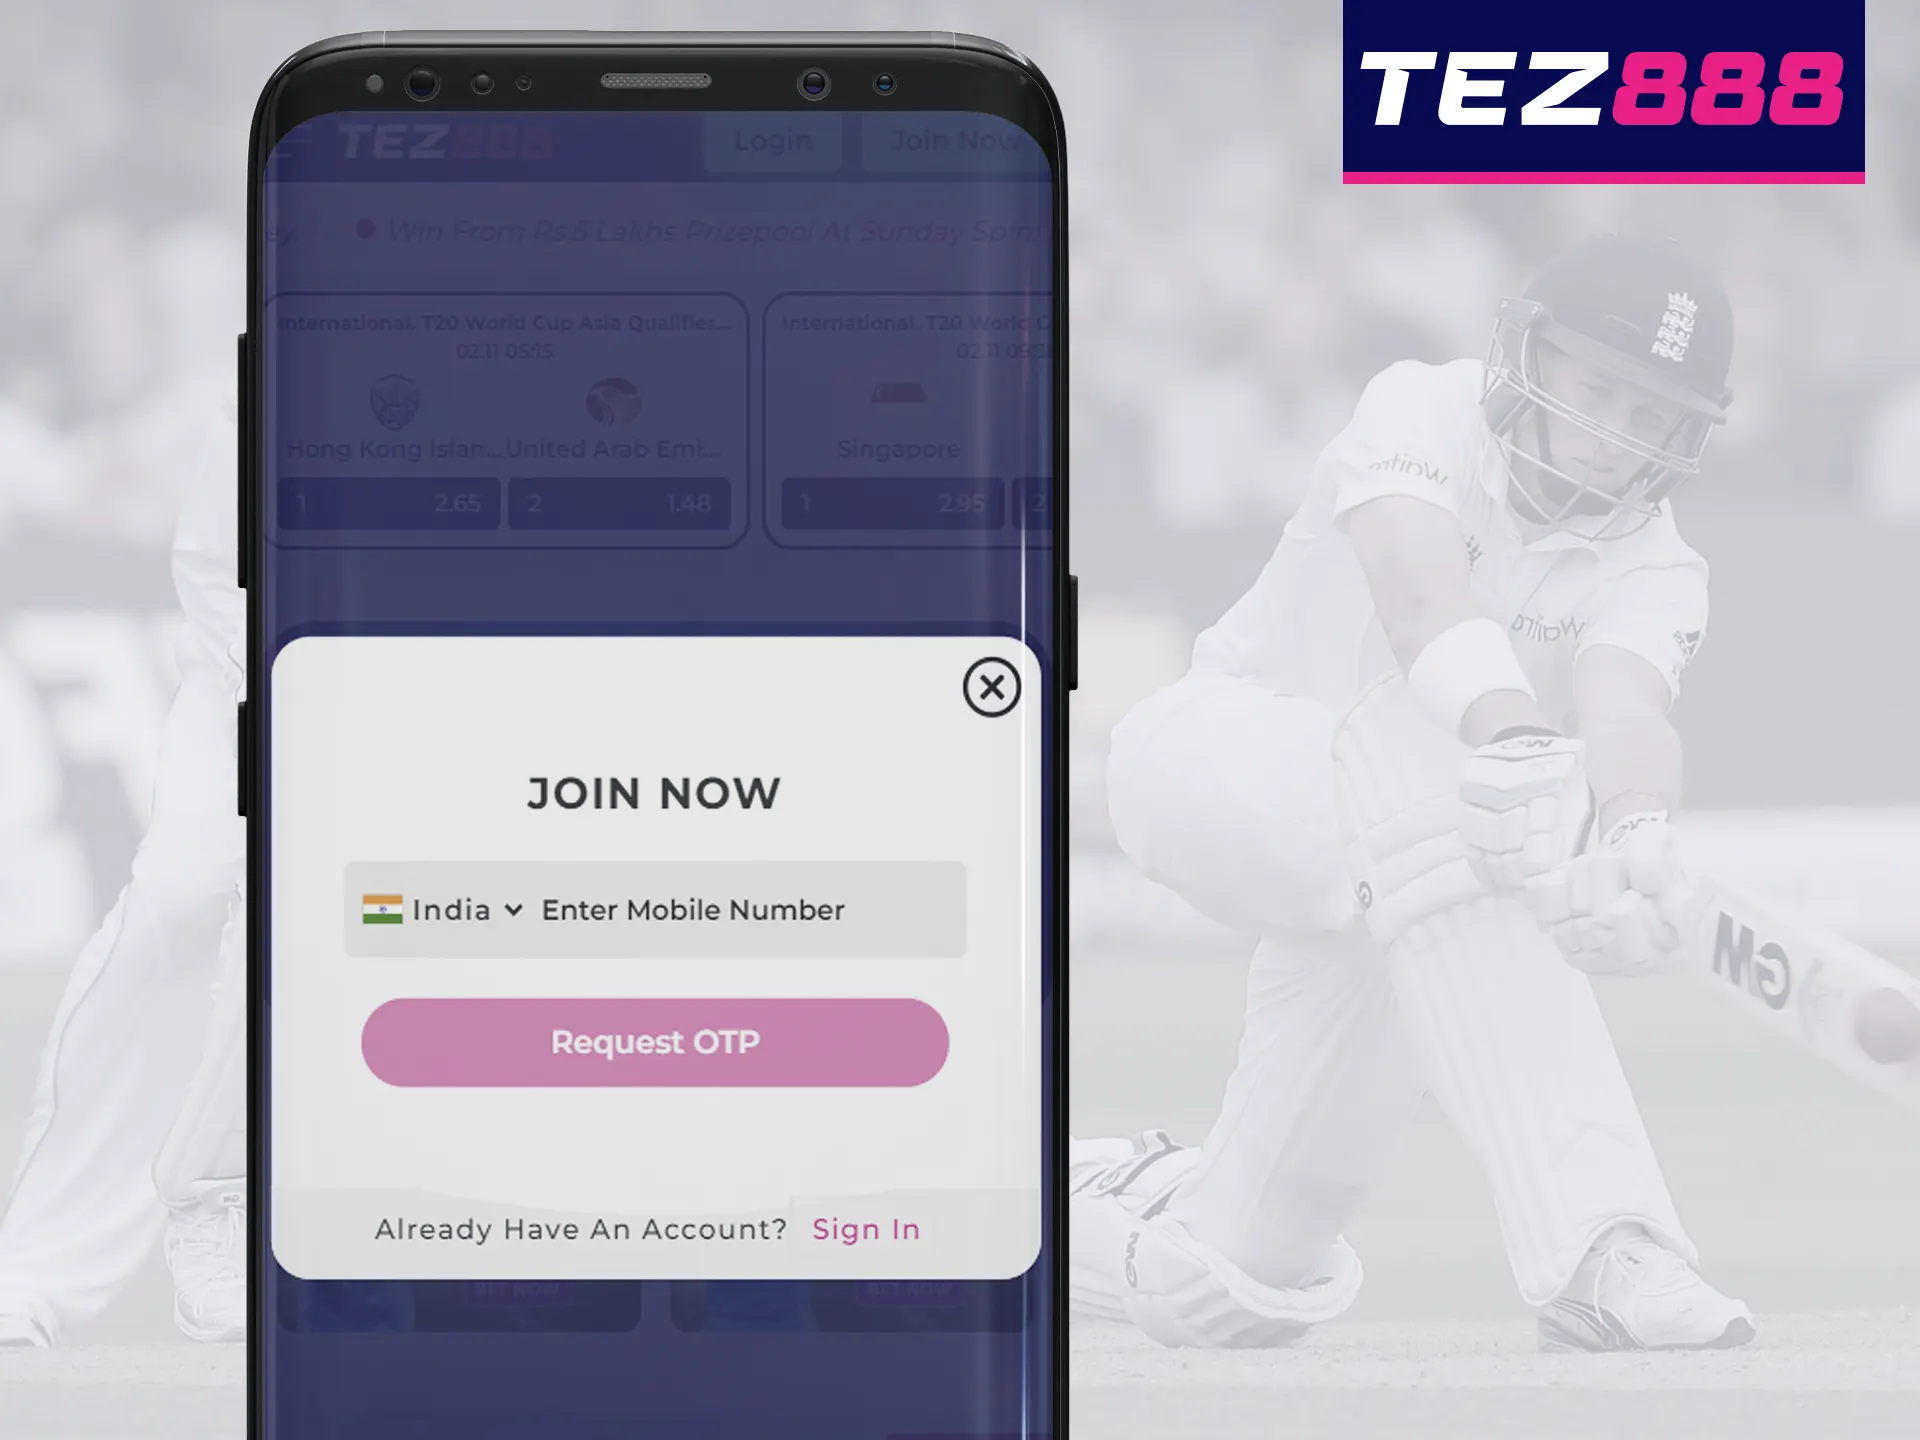 Create an account to enjoy the full functionality of the Tez888 application.